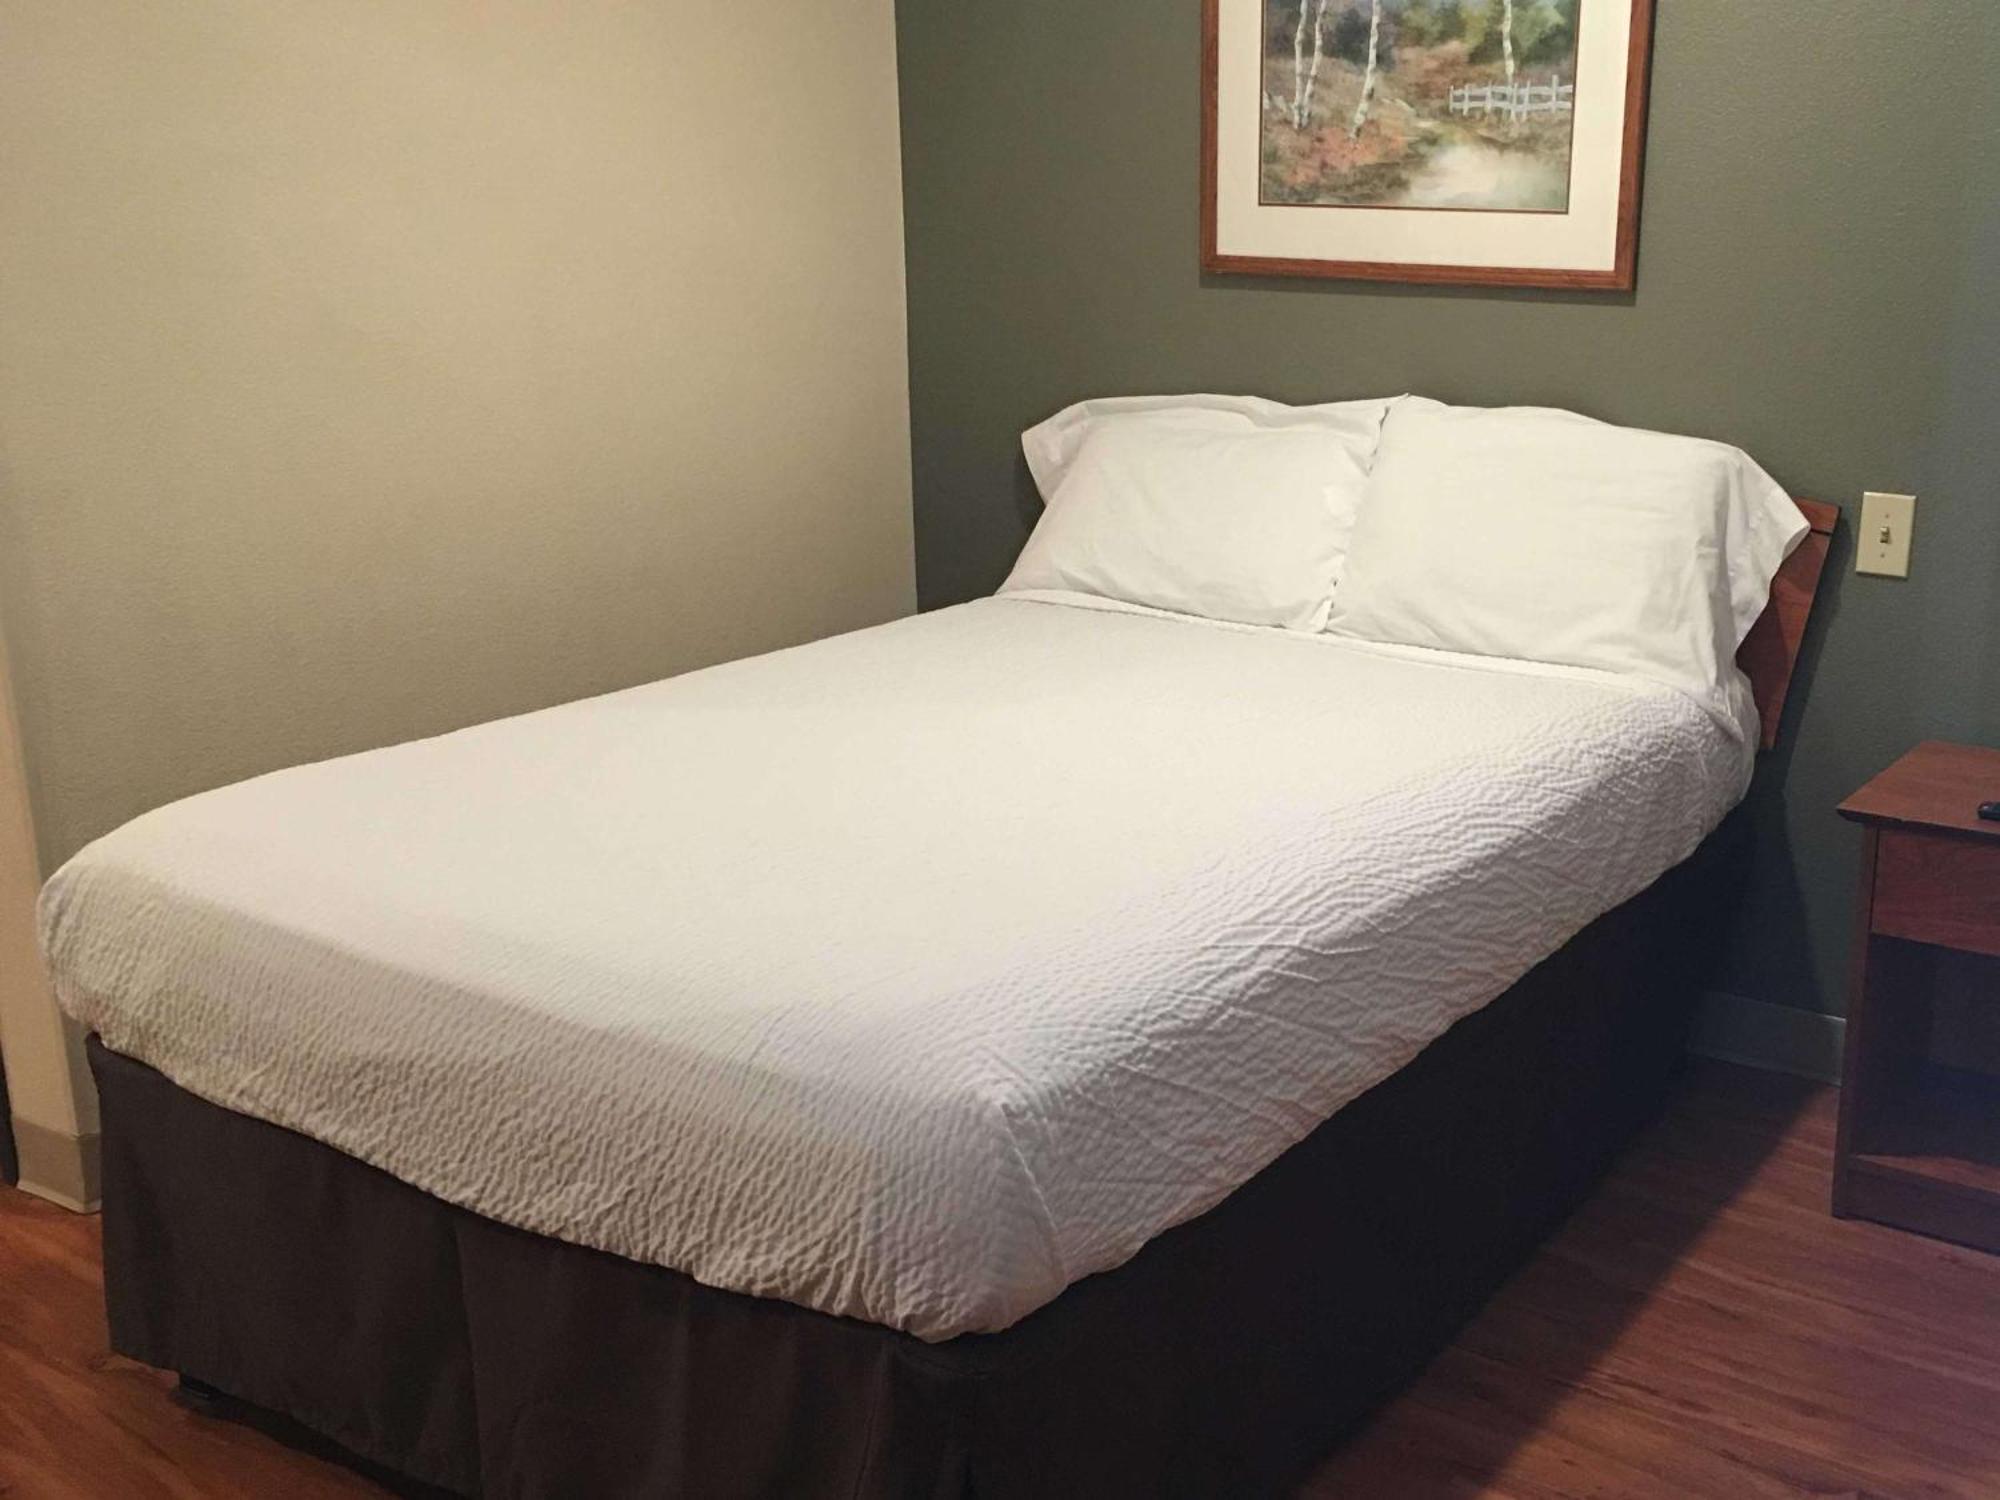 Extended Stay America Select Suites - Birmingham - 佩勒姆 外观 照片